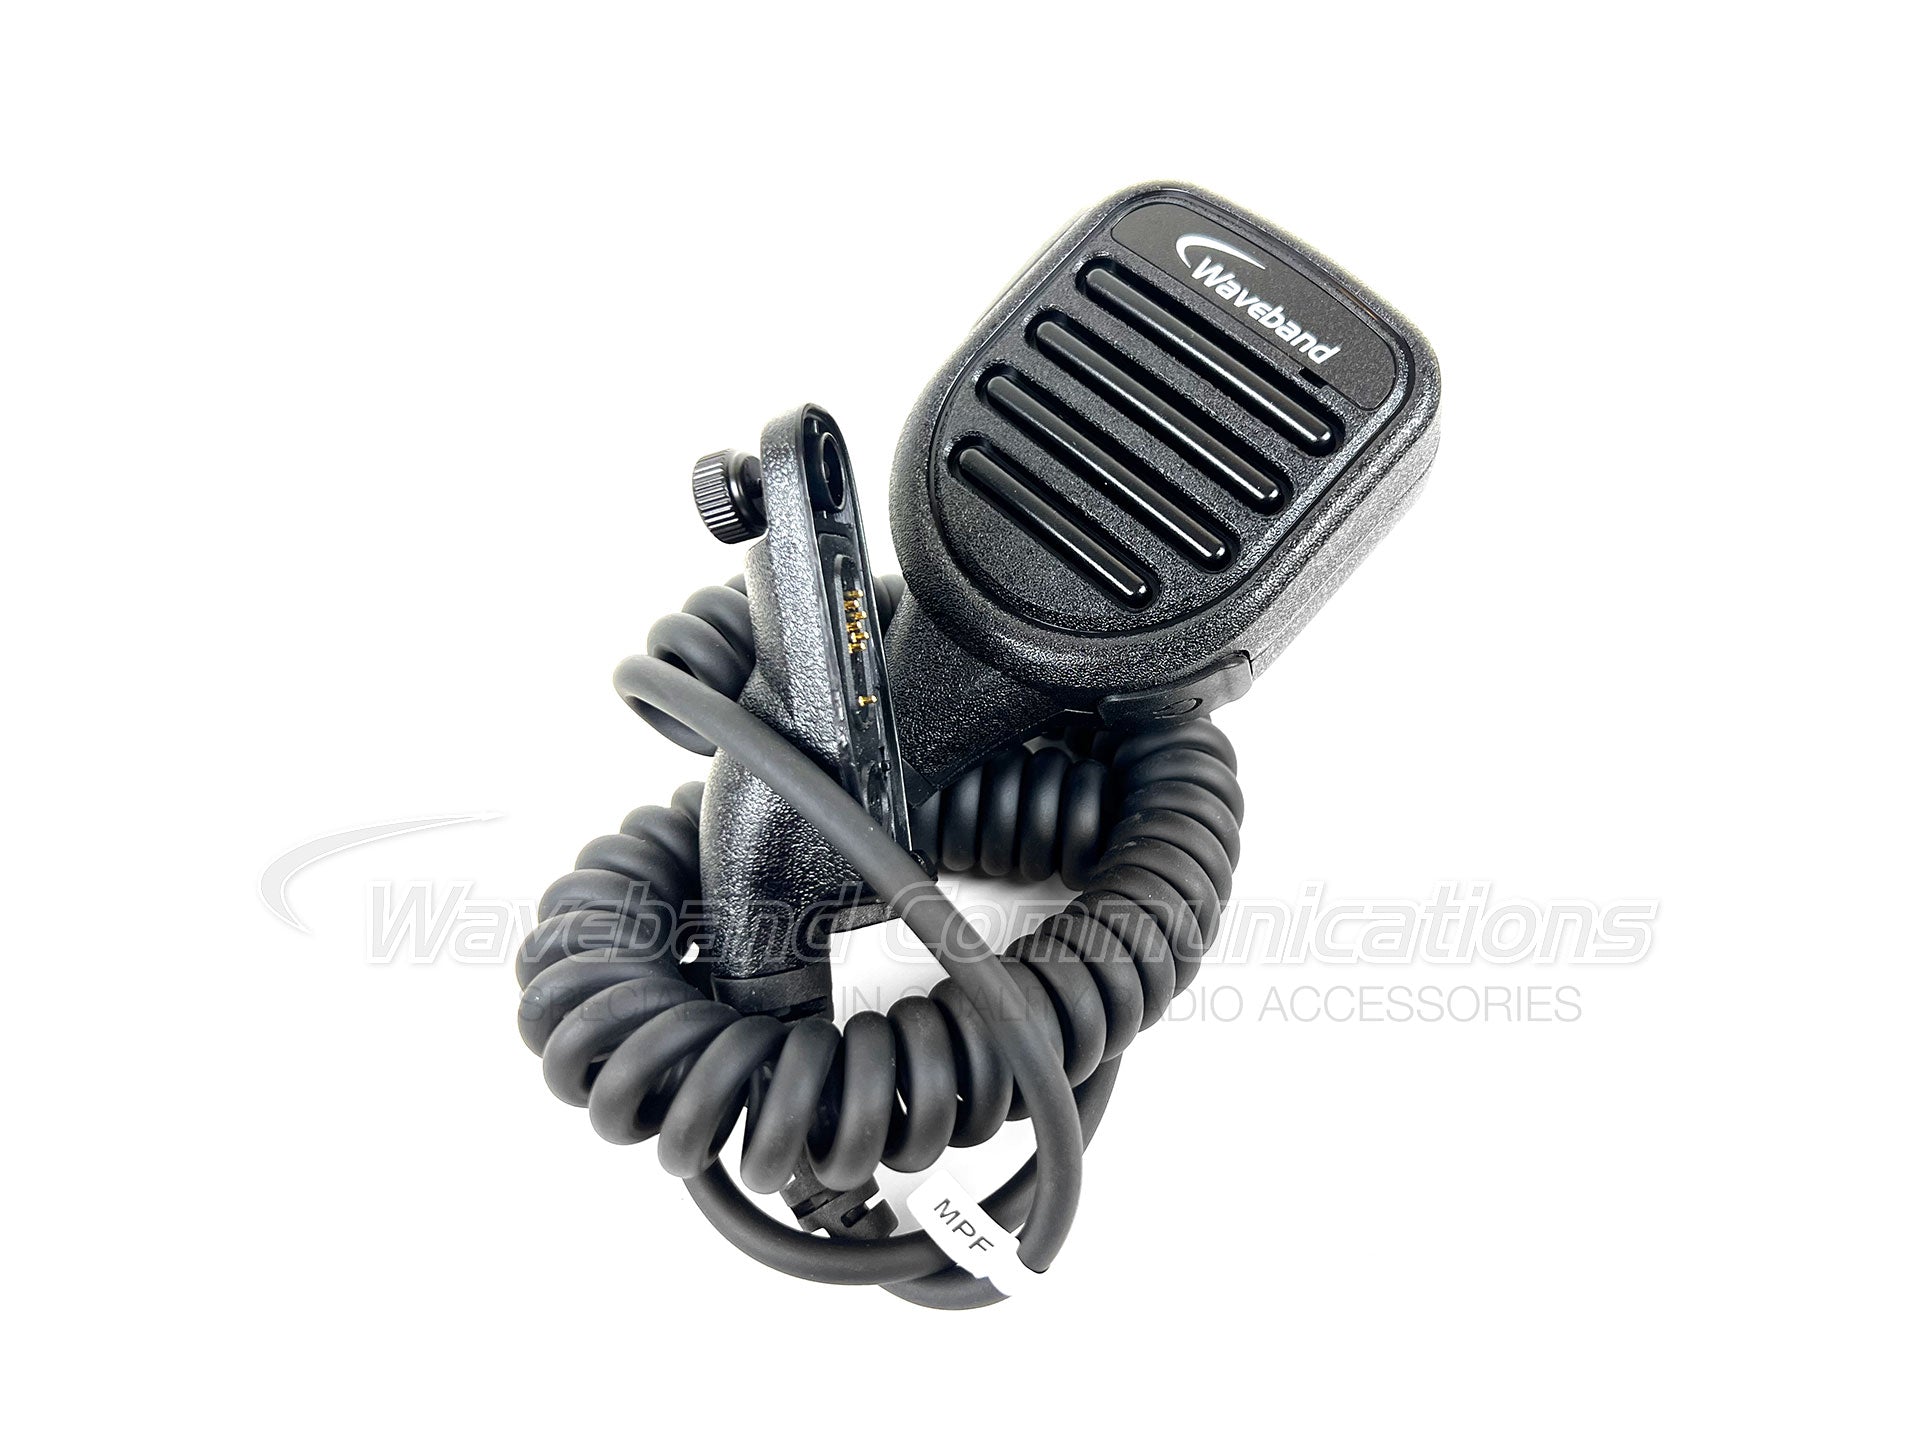 PMMN4025 Comparable Remote Speaker Microphone for Motorola XPR TRBO Radios